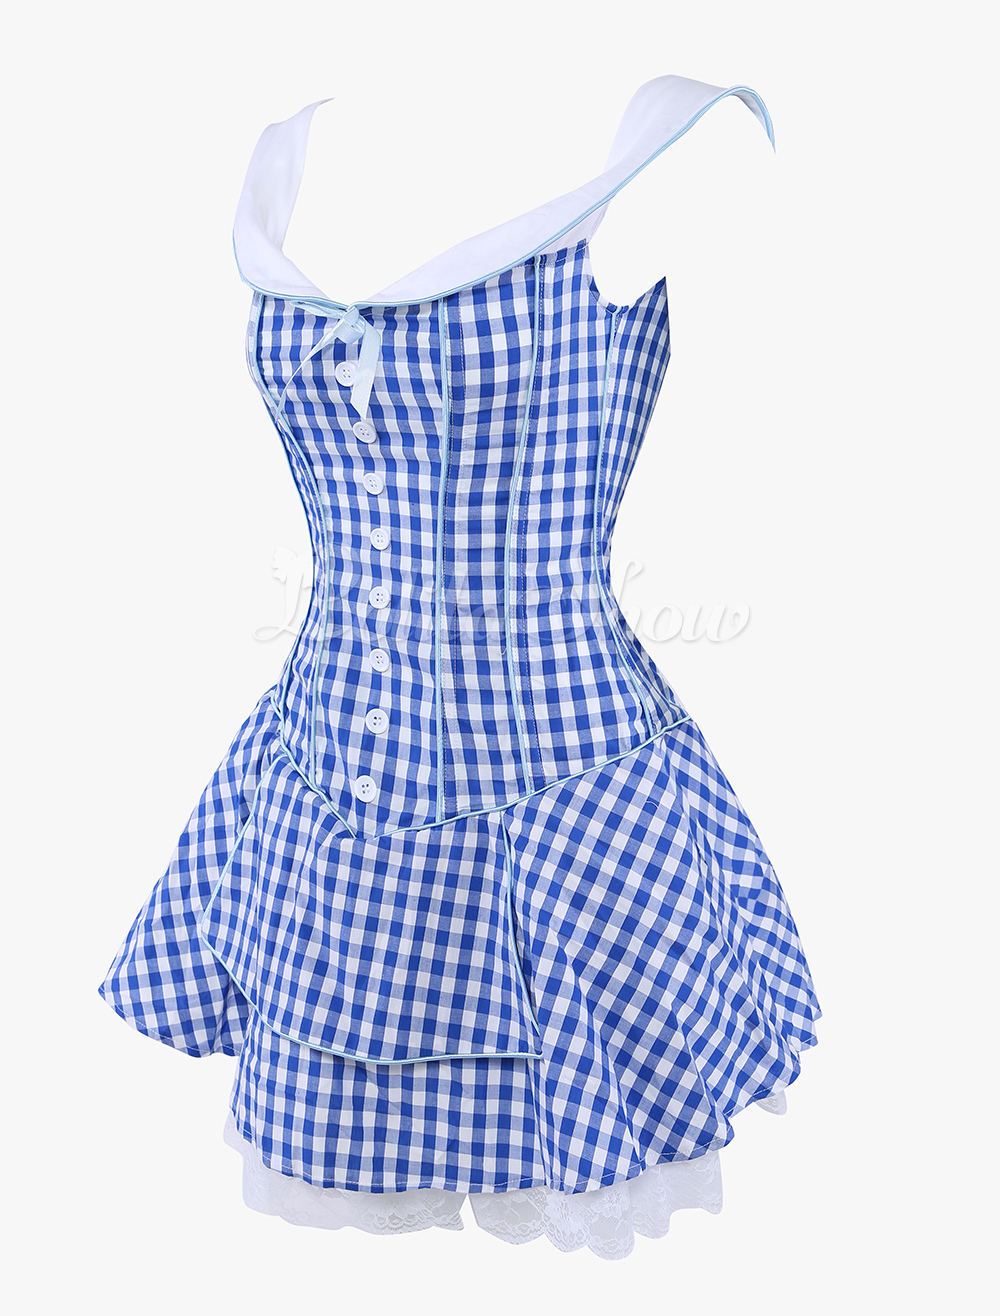 blue and white check dress